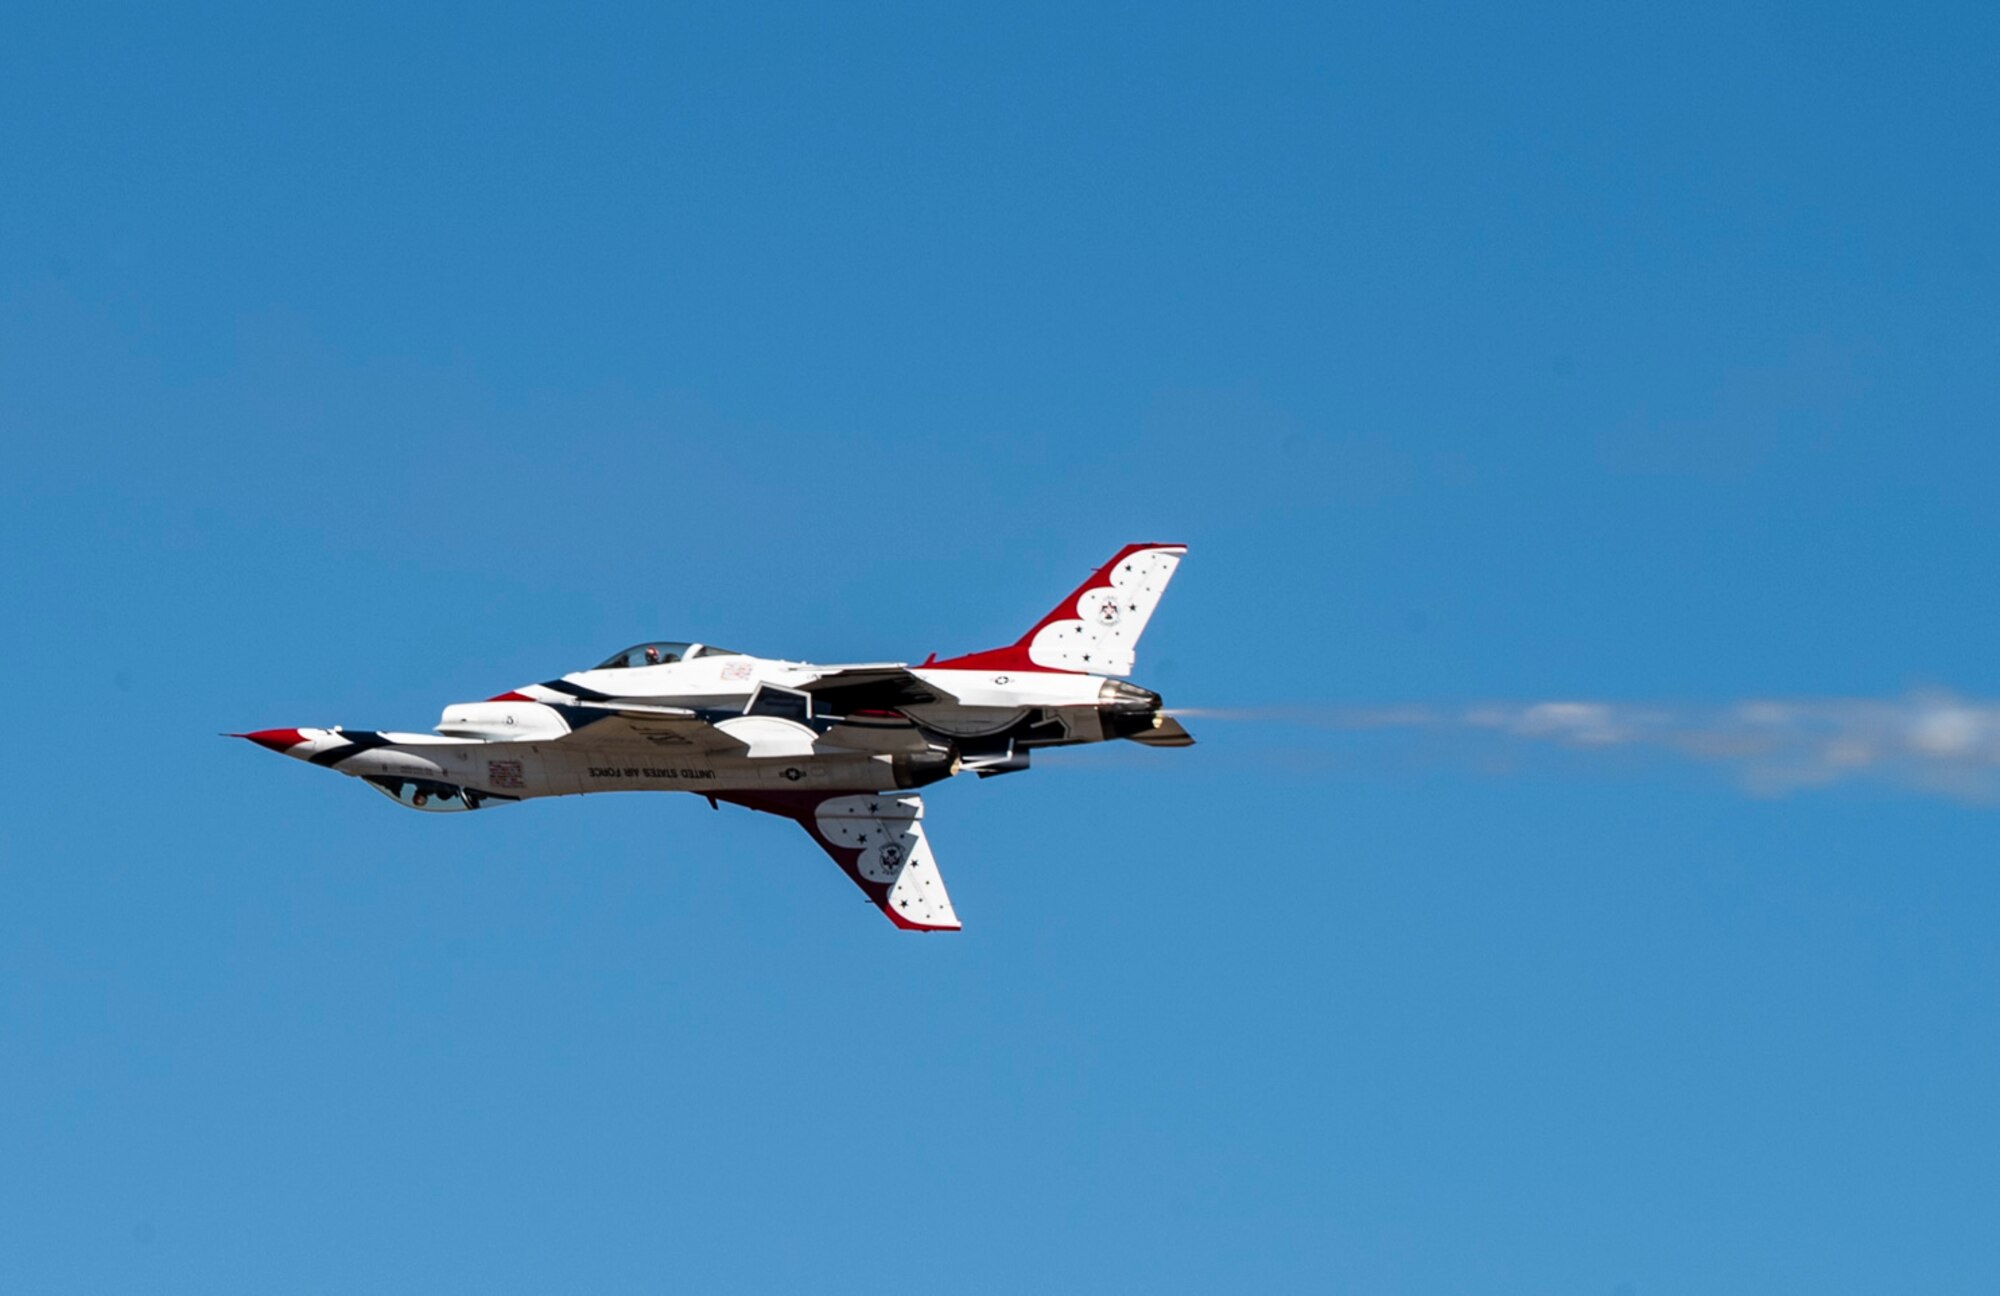 The U.S. Air Force Air Demonstration Squadron “Thunderbirds” fly F-16 Fighting Falcon aircraft above the McChord Field flightline while practicing for the Joint Base Lewis-McChord Airshow and Warrior Expo at JBLM, Washington, July 14, 2023. The mission of the JAWE is to foster goodwill to educate and familiarize attendees with the people, mission, and equipment of the Air Force, Army, and other Armed Services while continuing to provide installation-wide mission support. The Thunderbirds are one of the JAWE’s premier acts and will be joined by aerial demonstrations from the C-17 West Coast Demonstration Team, Tora! Tora! Tora! and many more. (U.S. Air Force photo by Staff Sgt. Rachel Williams)